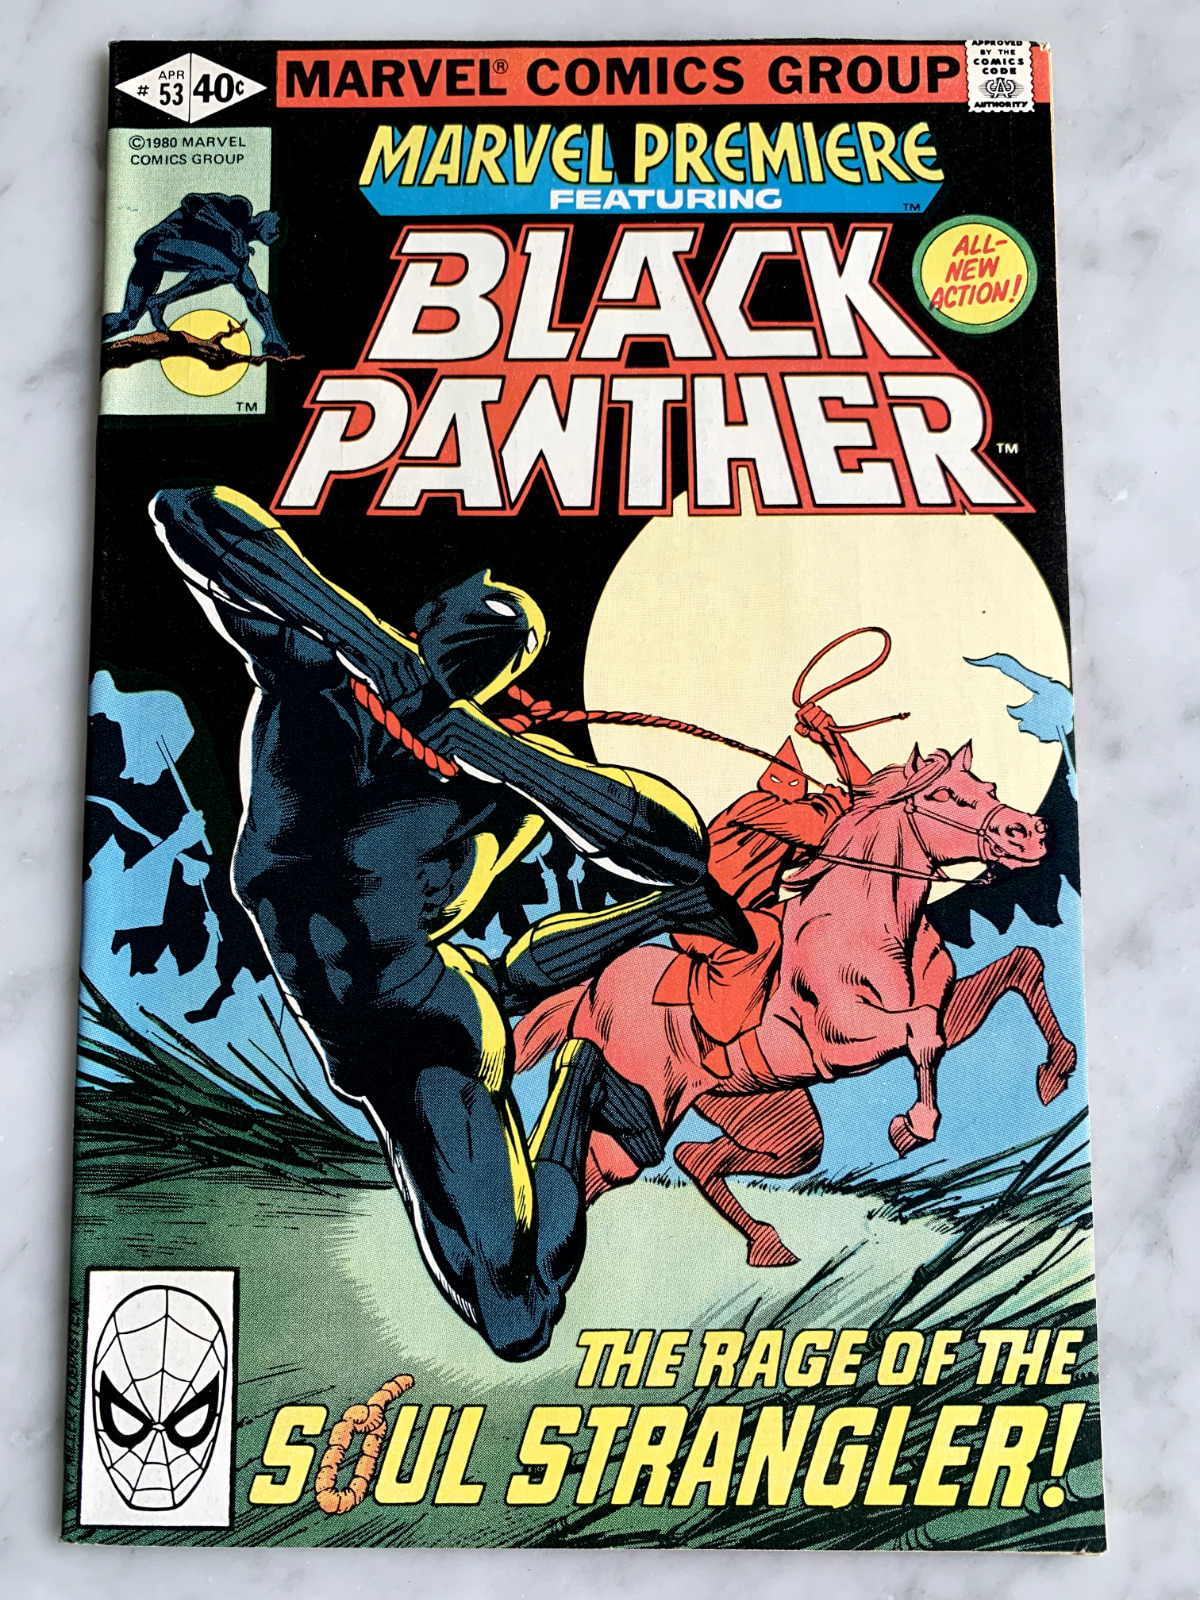 Marvel Premiere w/ Black Panther #53 KEY Iconic Miller Cover in HG! (1980)